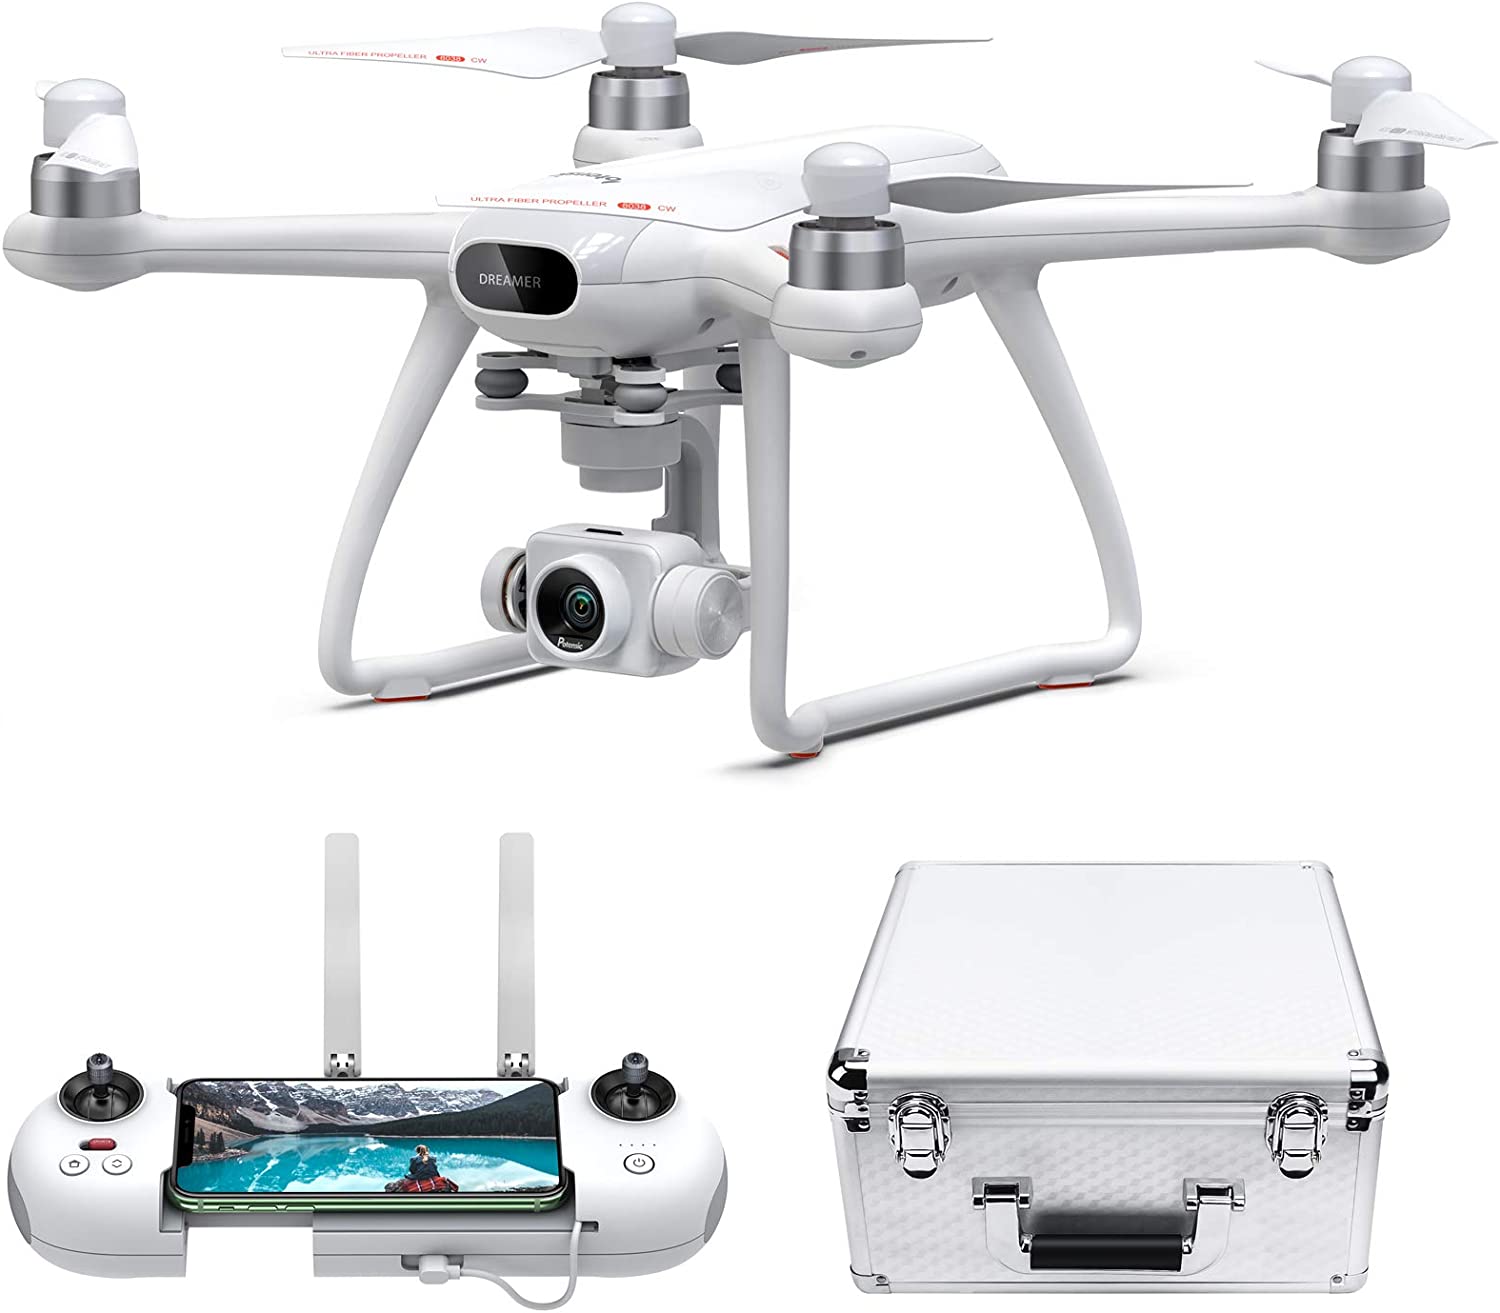 Drone - Potensic Dreamer 4K Pro Drones with 3-Axis Gimbal Camera for Adults, FPV GPS Quadcopter with 2KM Transmission Range, 28mins Flight, Brushless Motor, Auto-Return, with Metal Carry case and 32G SD Card 